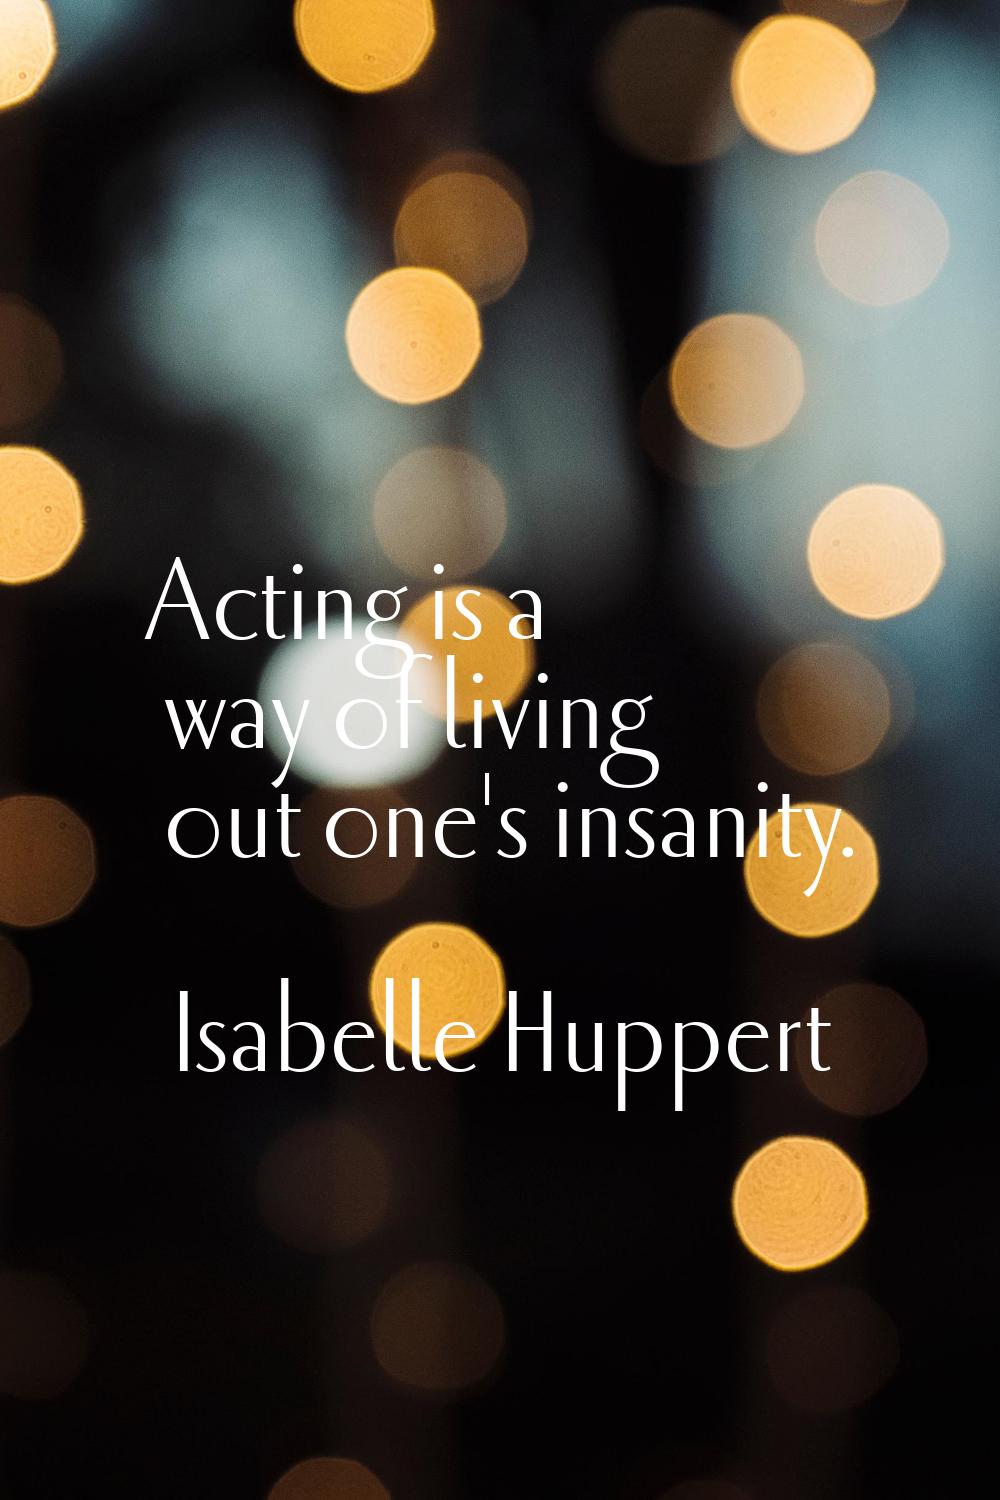 Acting is a way of living out one's insanity.